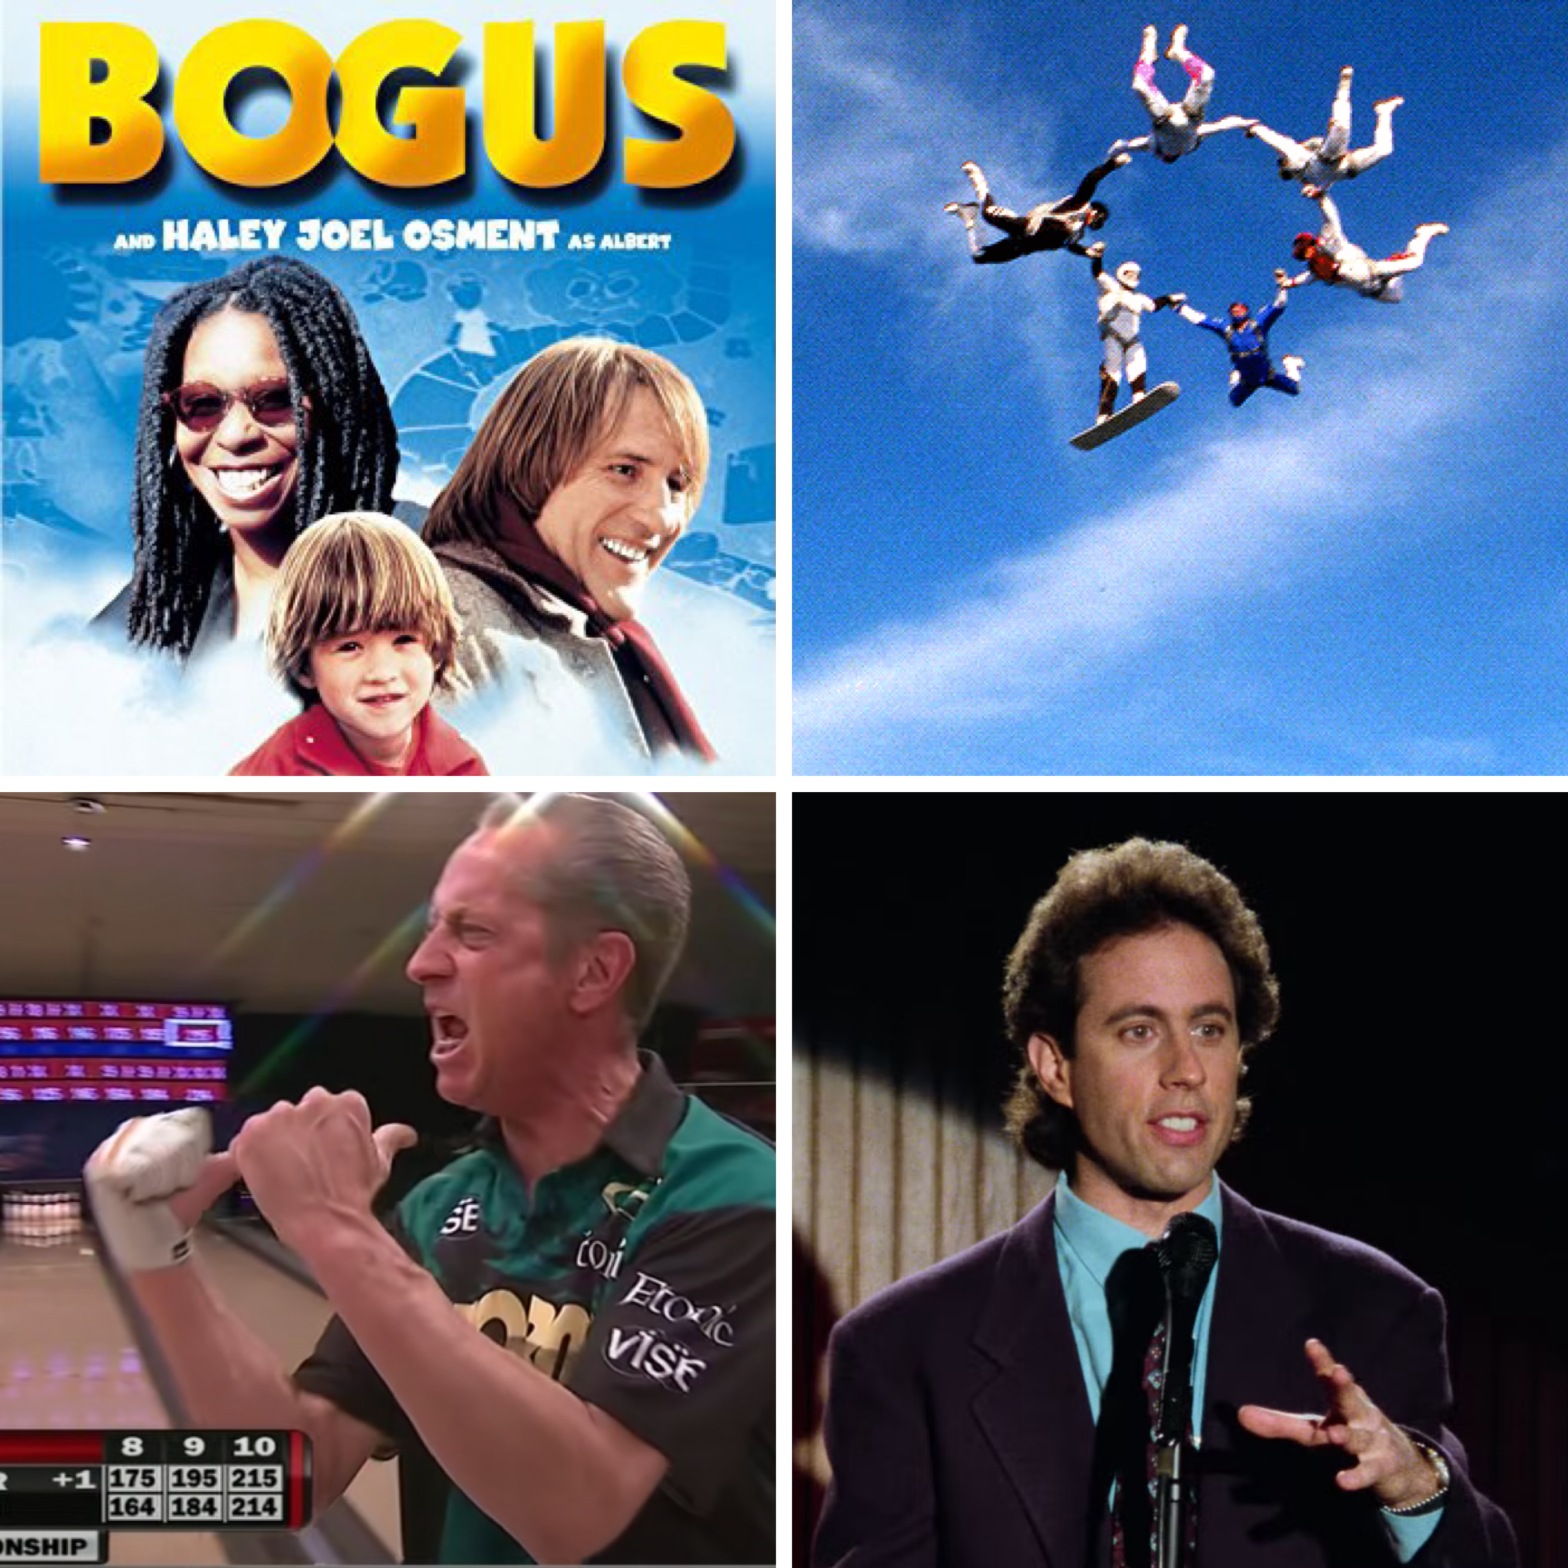 The movie poster for Bogus, the Power Rangers sky diving scene, an excited bowler, and Jerry Seinfeld.